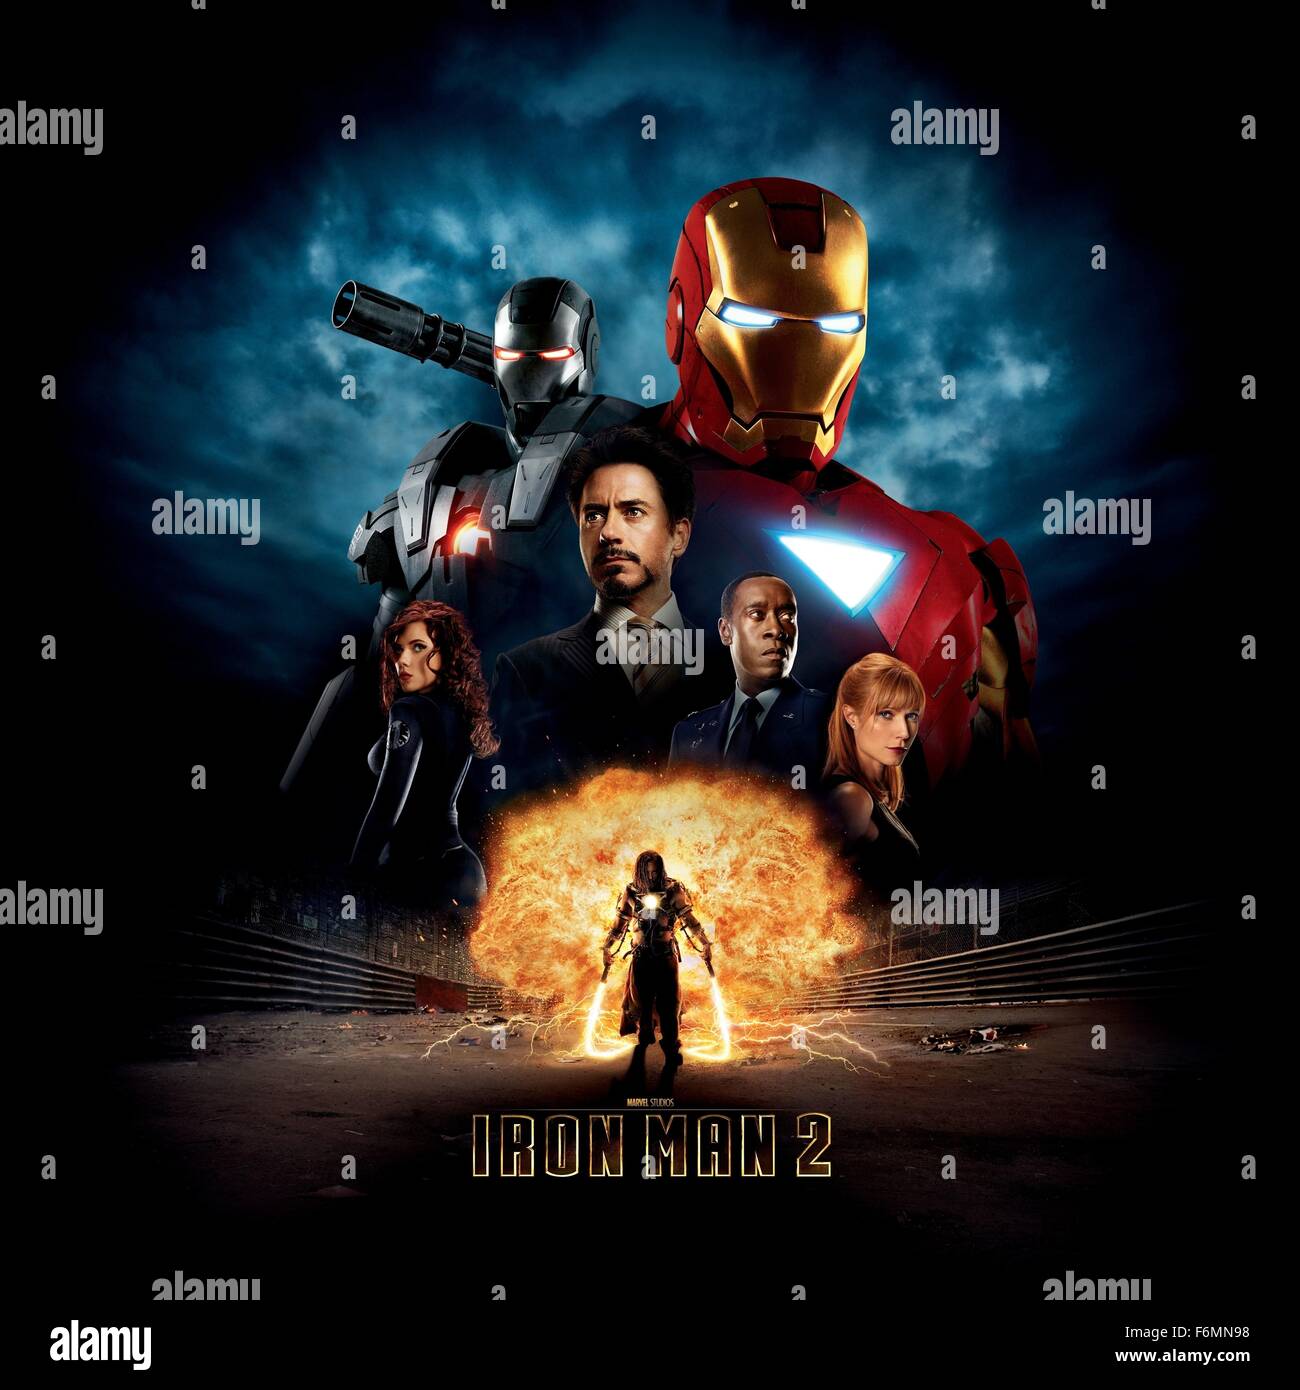 RELEASE DATE: May 7, 2010 MOVIE TITLE: Iron Man 2 STUDIO: Paramount  Pictures DIRECTOR: Jon Favreau PLOT: Billionaire Tony Stark must contend  with deadly issues involving the government, his own friends, as